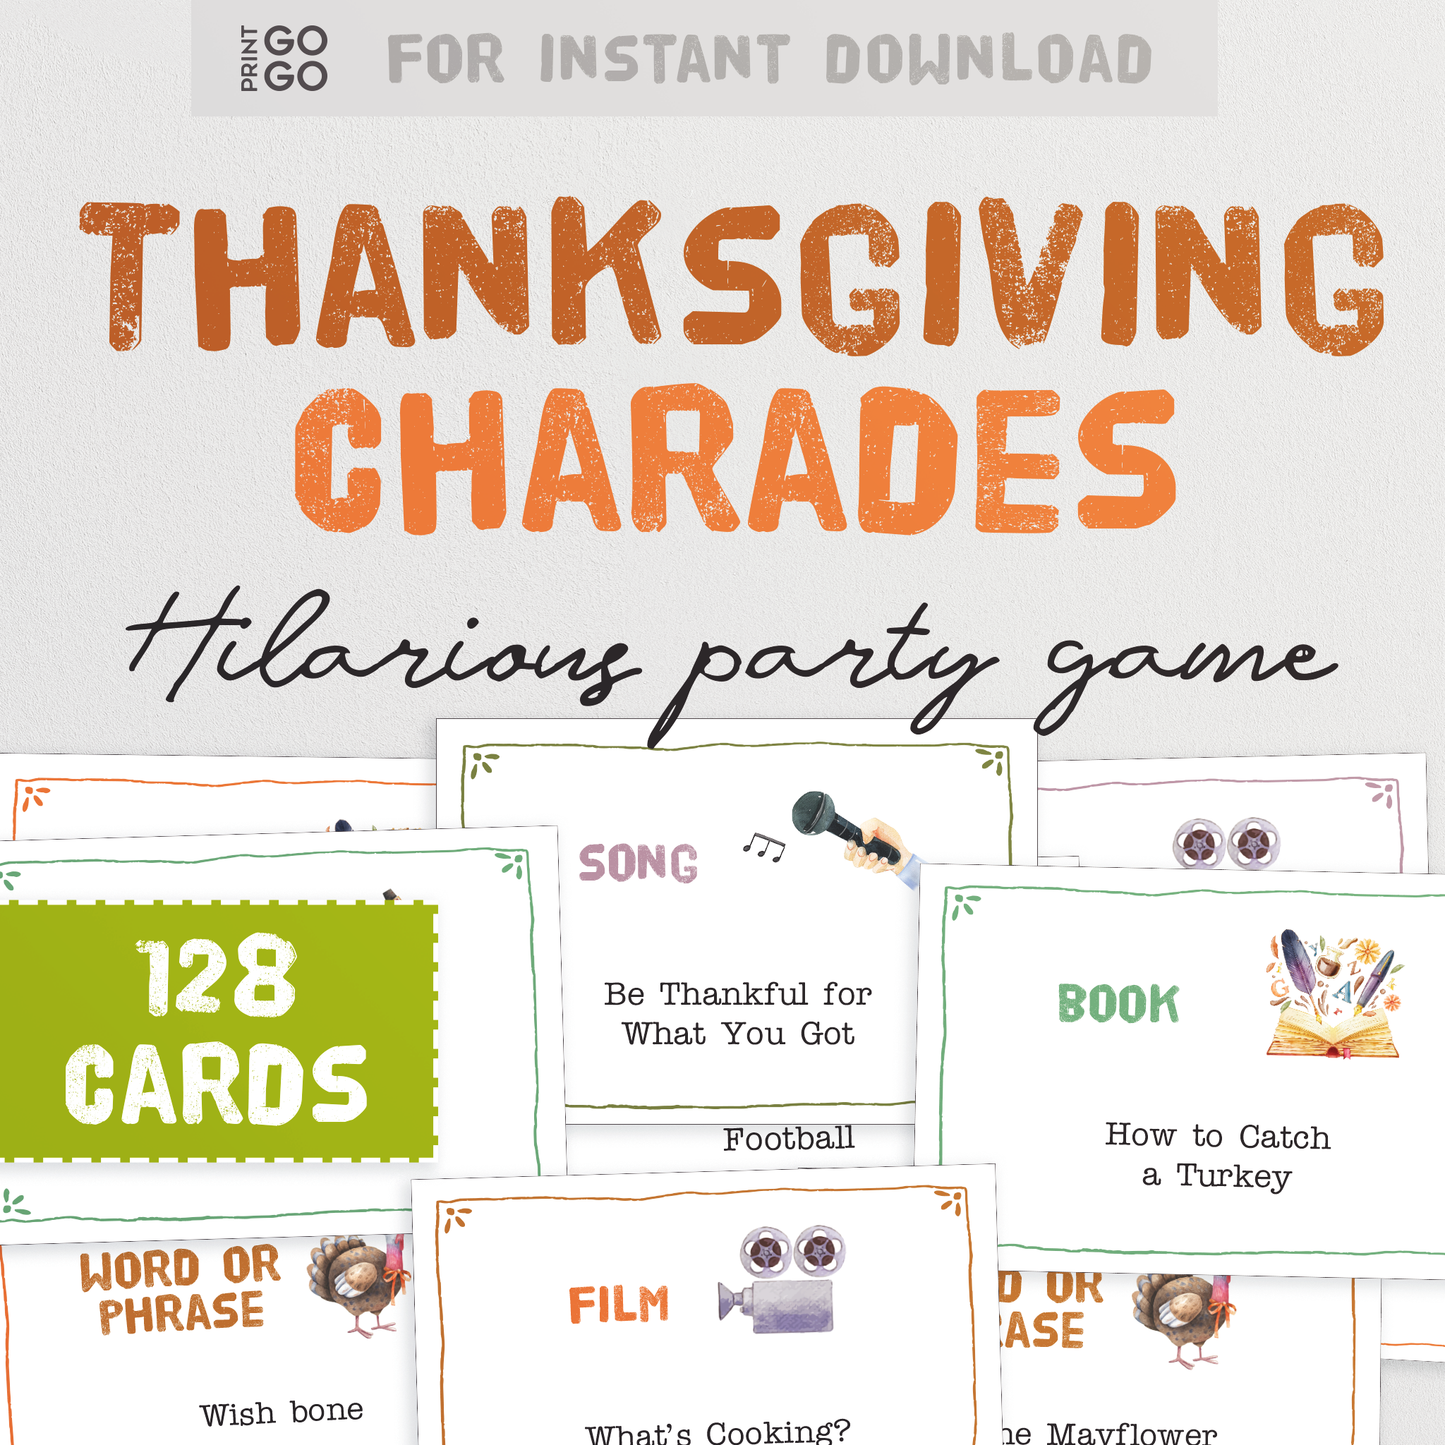 Thanksgiving Charades - The Fun-Filled Family Team Game